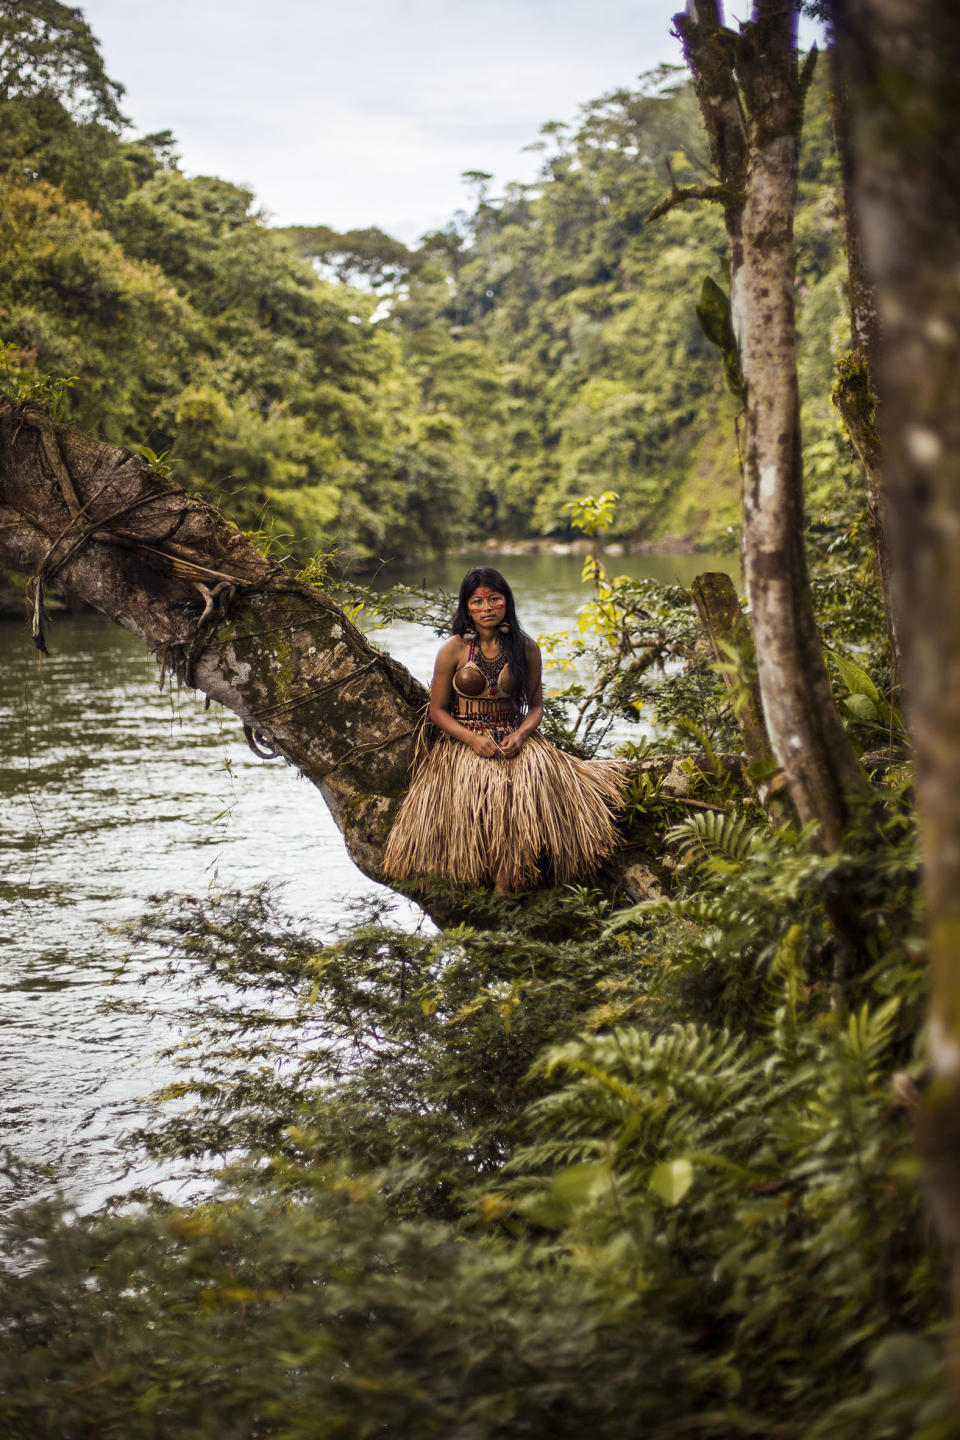 <p>“More and more tribes of Amazonia are starting to adopt modern clothes for everyday life. But they are still keeping their traditional clothes for important events. I photographed this young woman in her wedding outfit.” <i>[Photo: Mihaela Noroc]</i> </p>